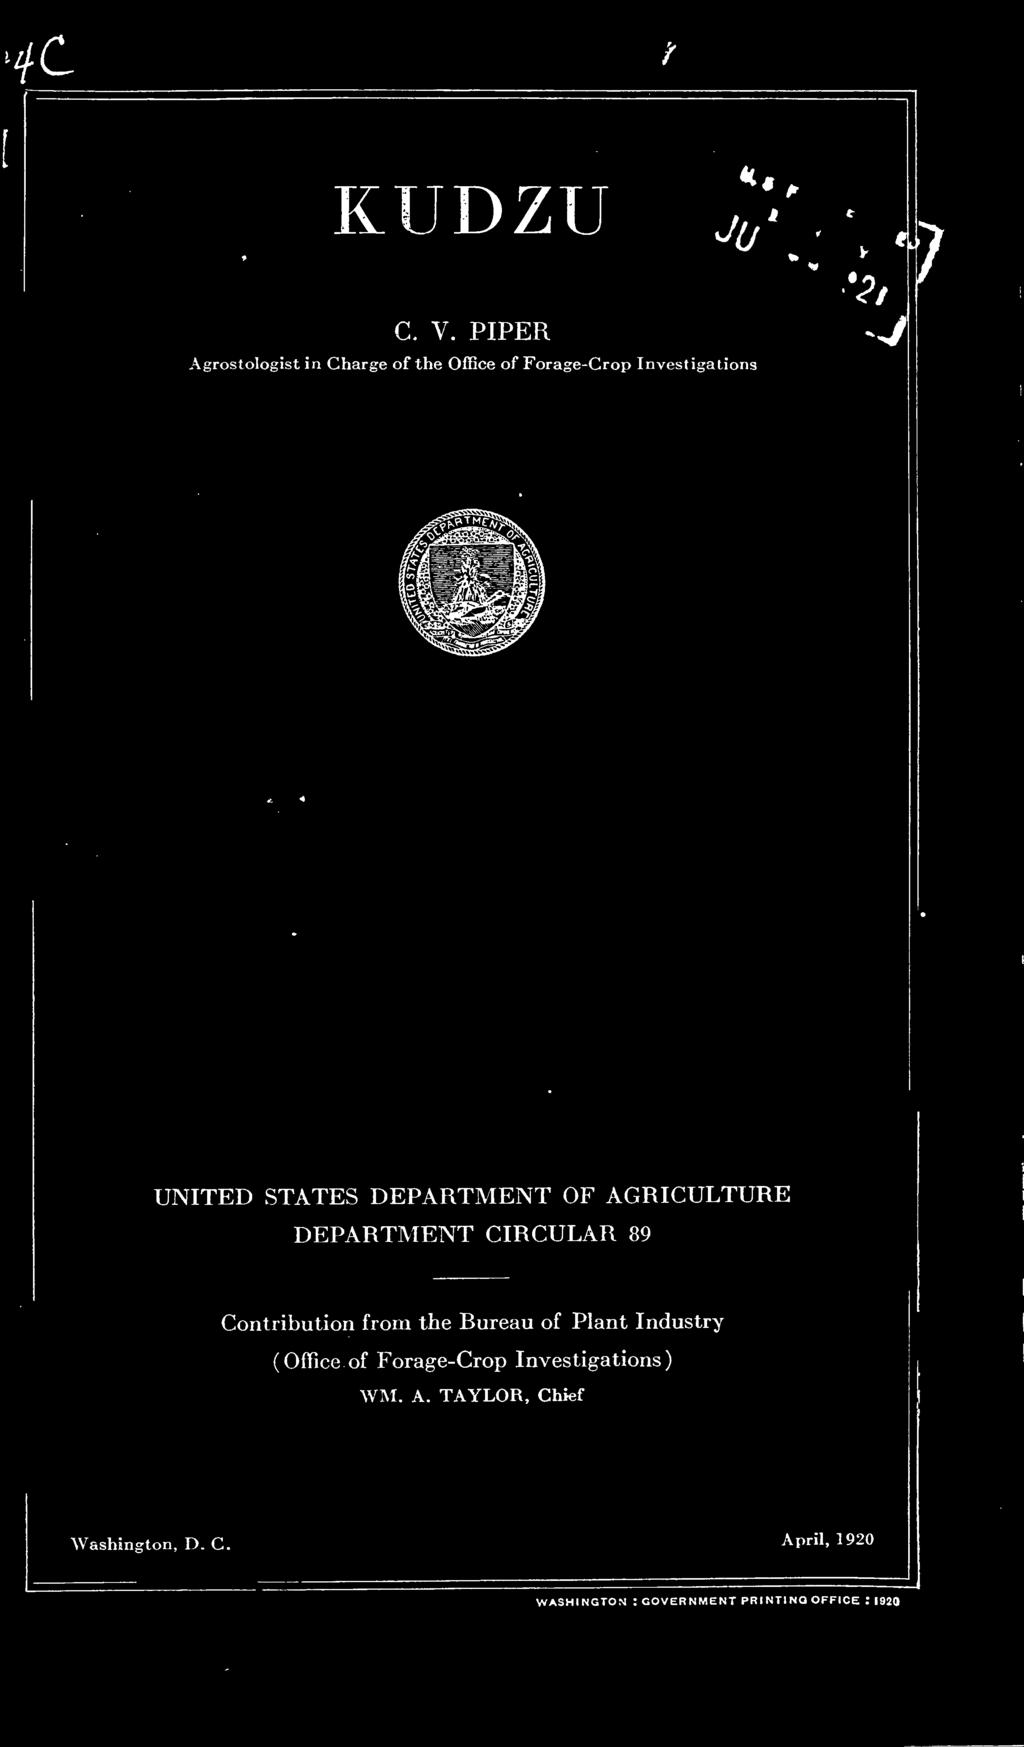 the Bureau of Plant Industry (Office of Forage-Crop